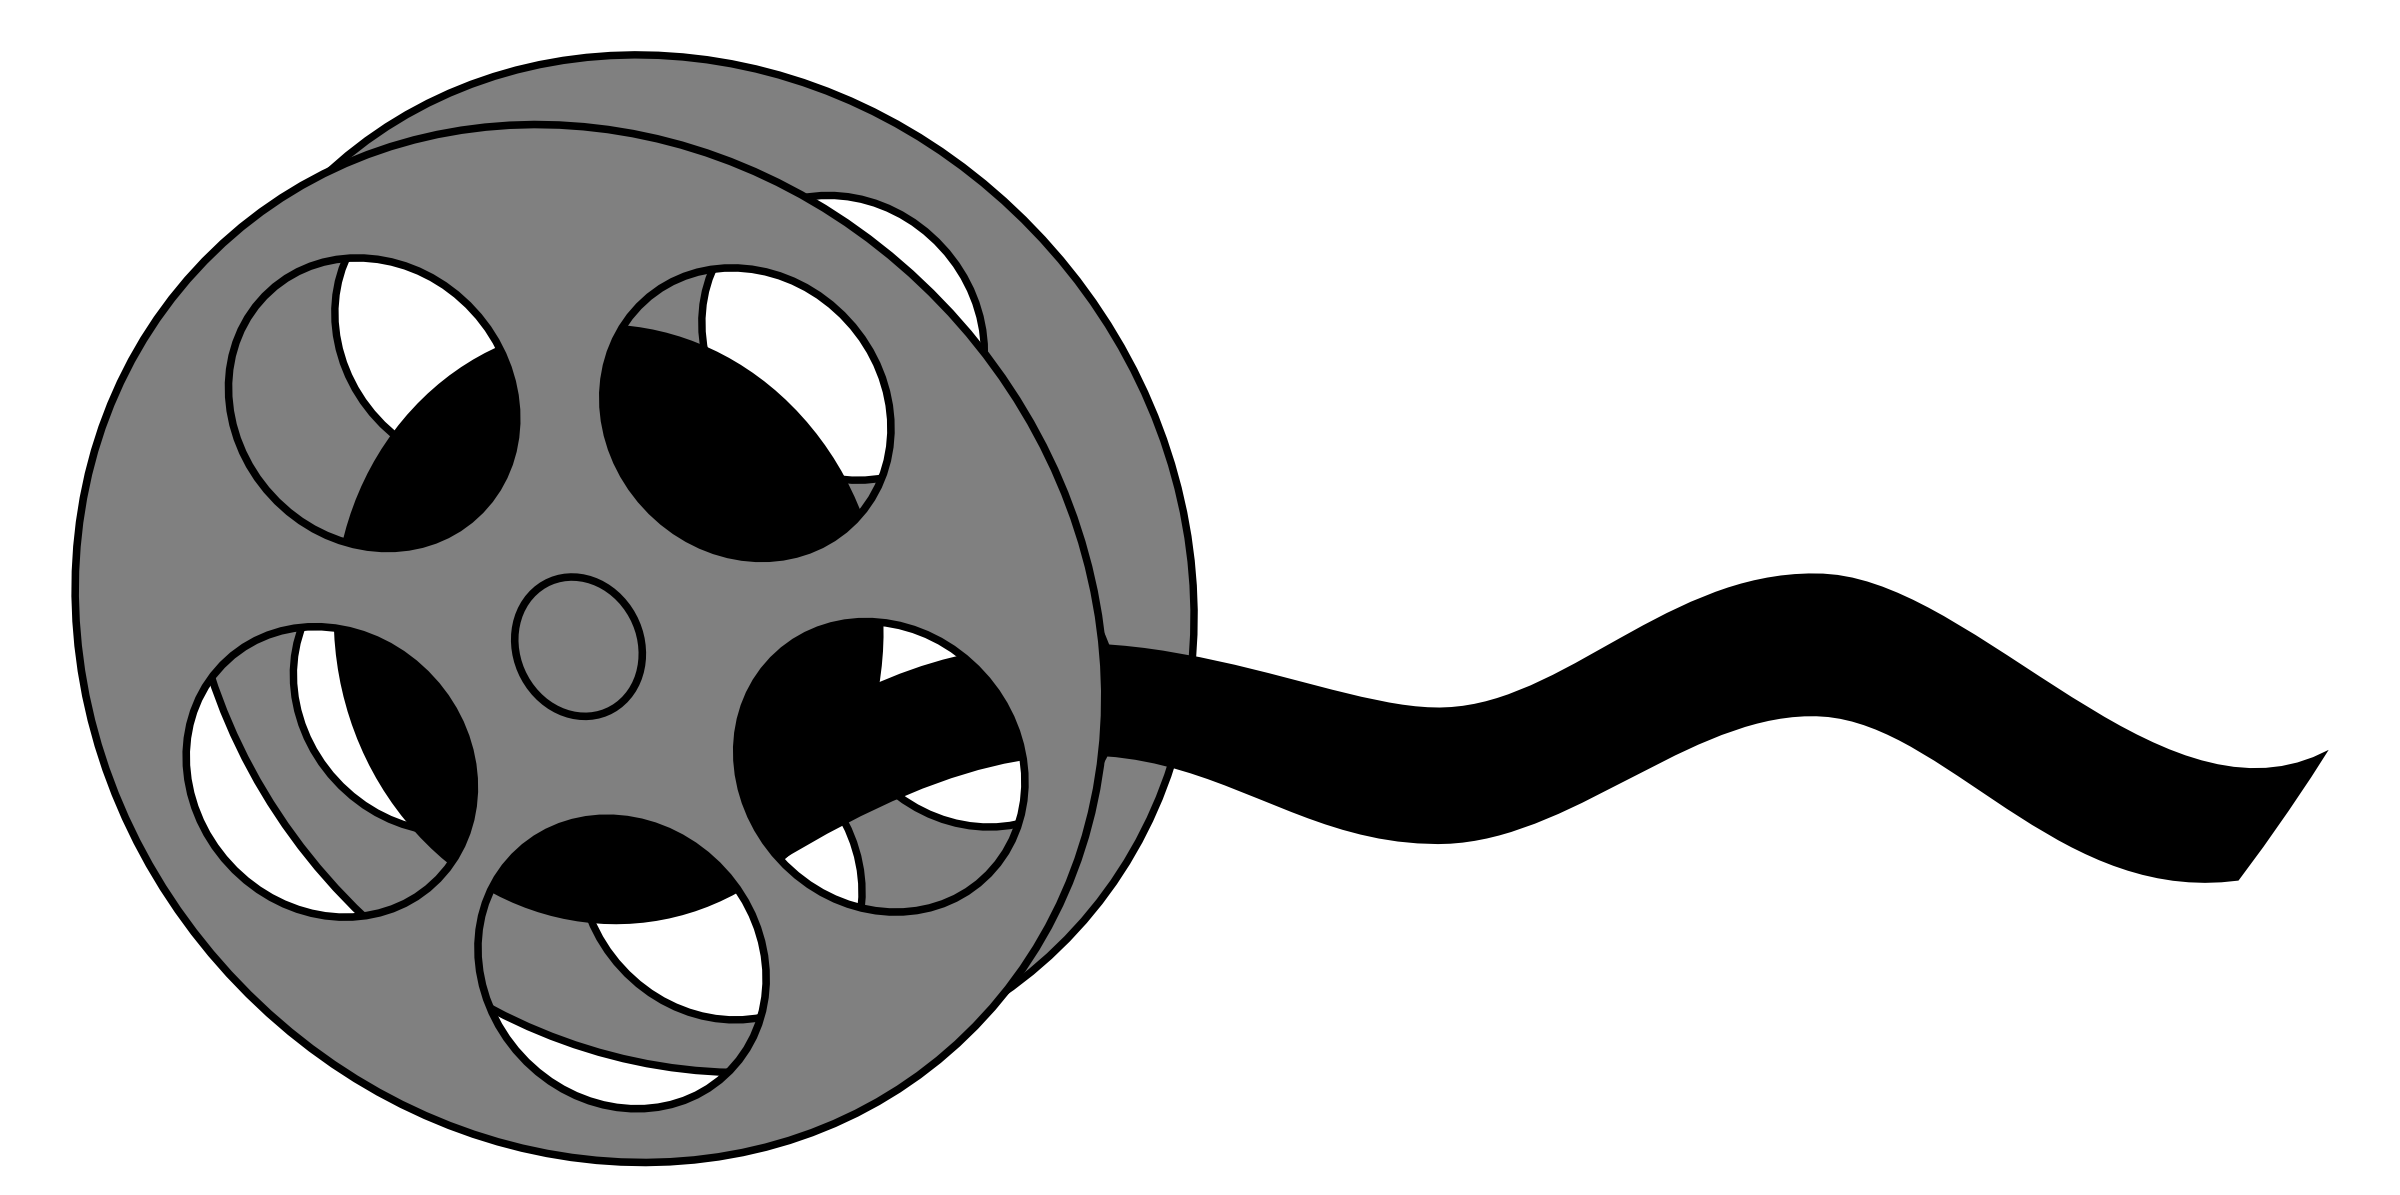 Movie Projector Clipart   Clipart Panda   Free Clipart Images